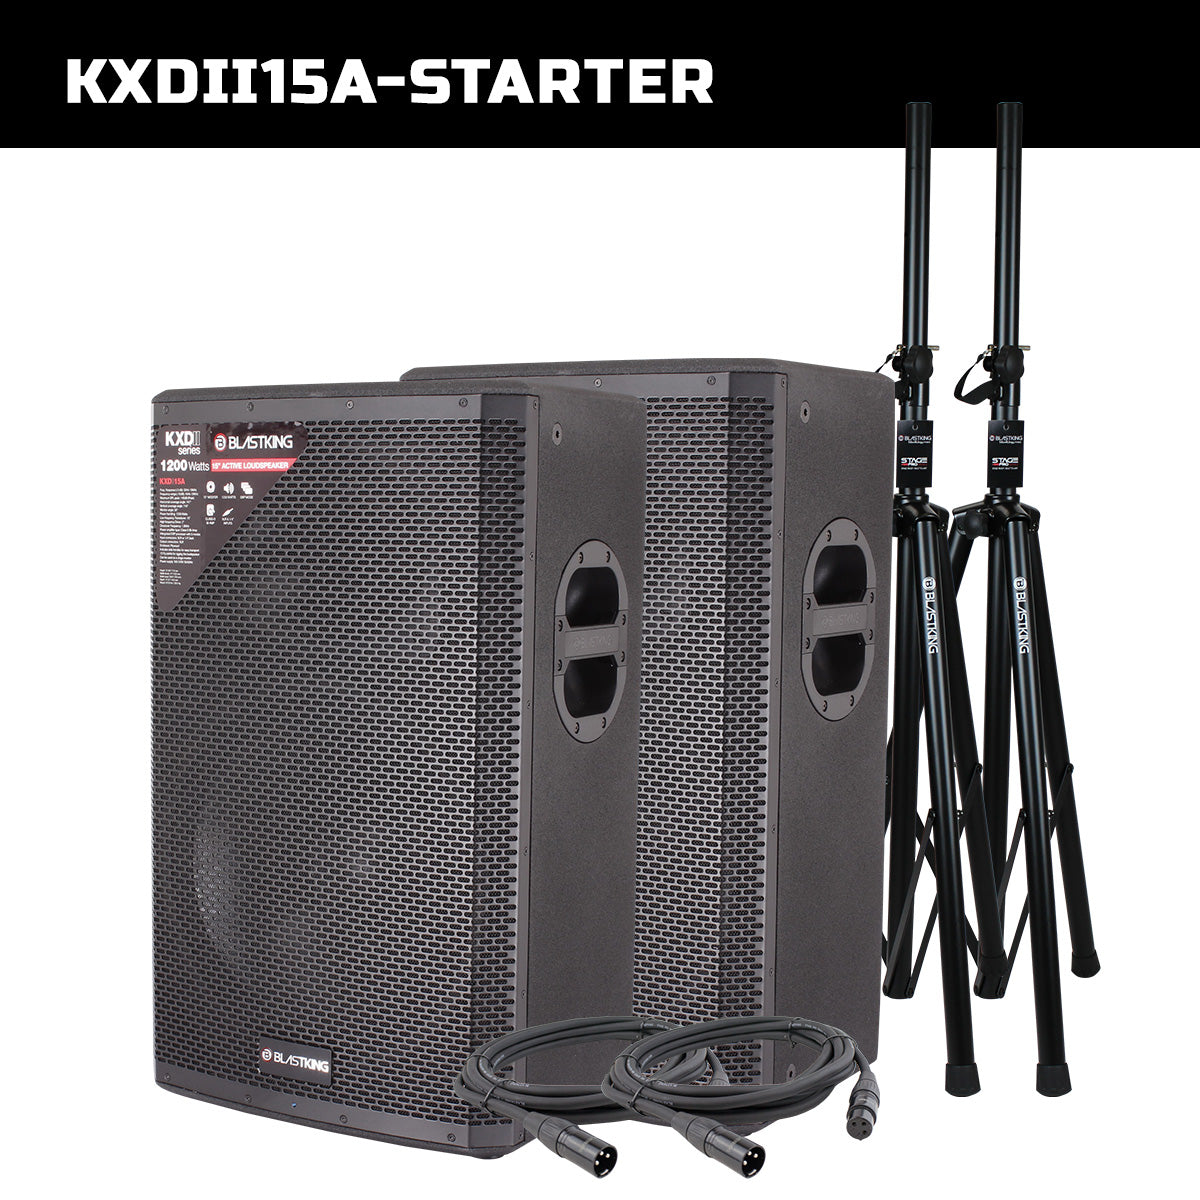 Blastking KXDII15A-STARTER (2) 12” Active Loudspeakers 1200 Watts Class-D Bi Amp DSP Mode with Stands and Cables